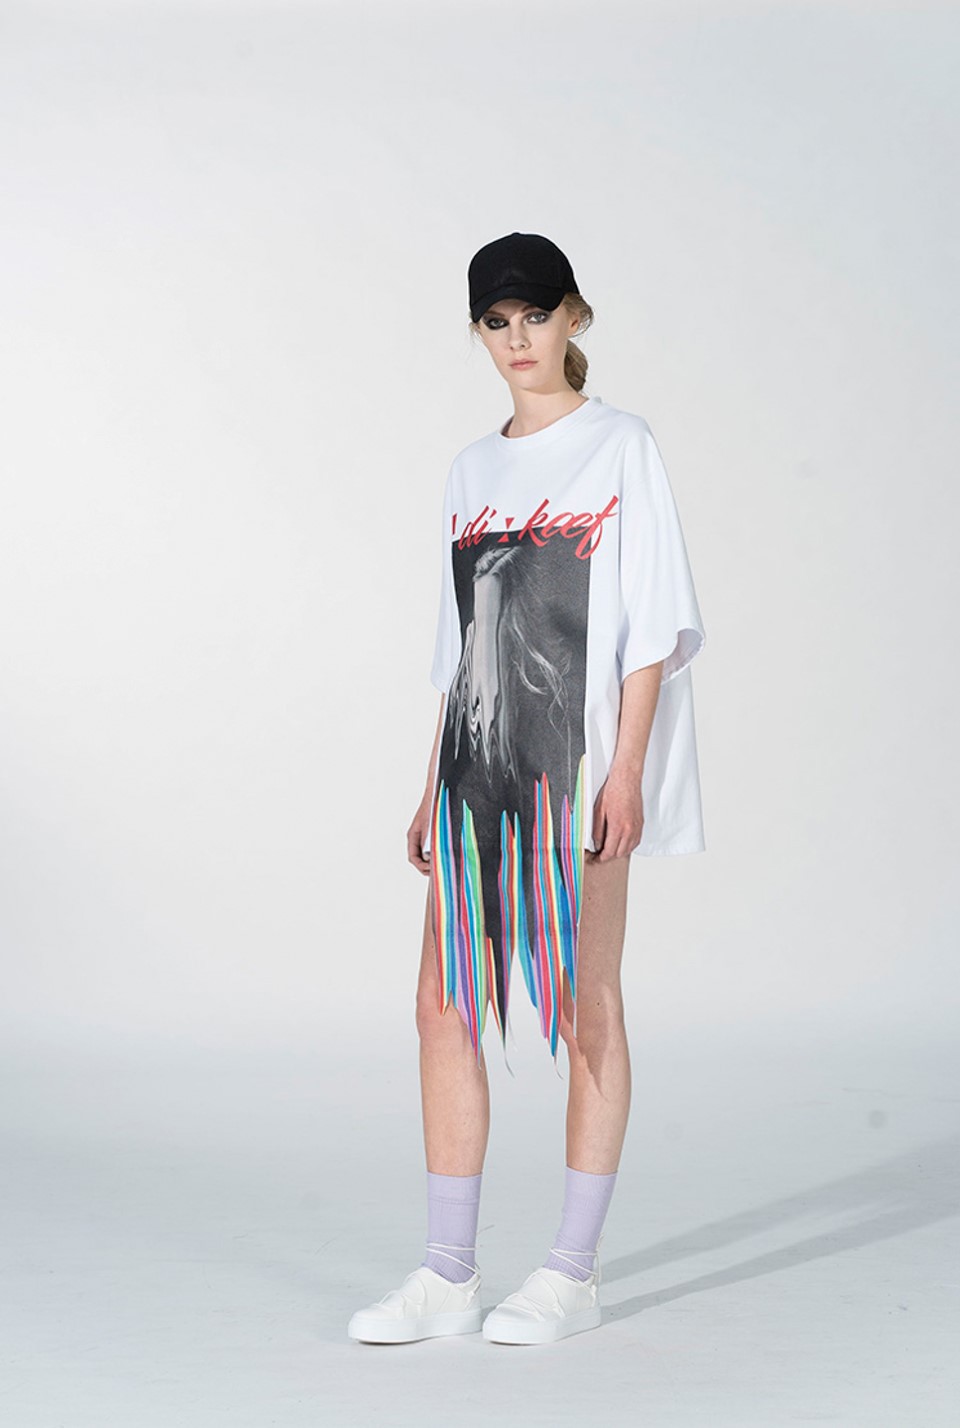 Image of collection by Josephine Persson